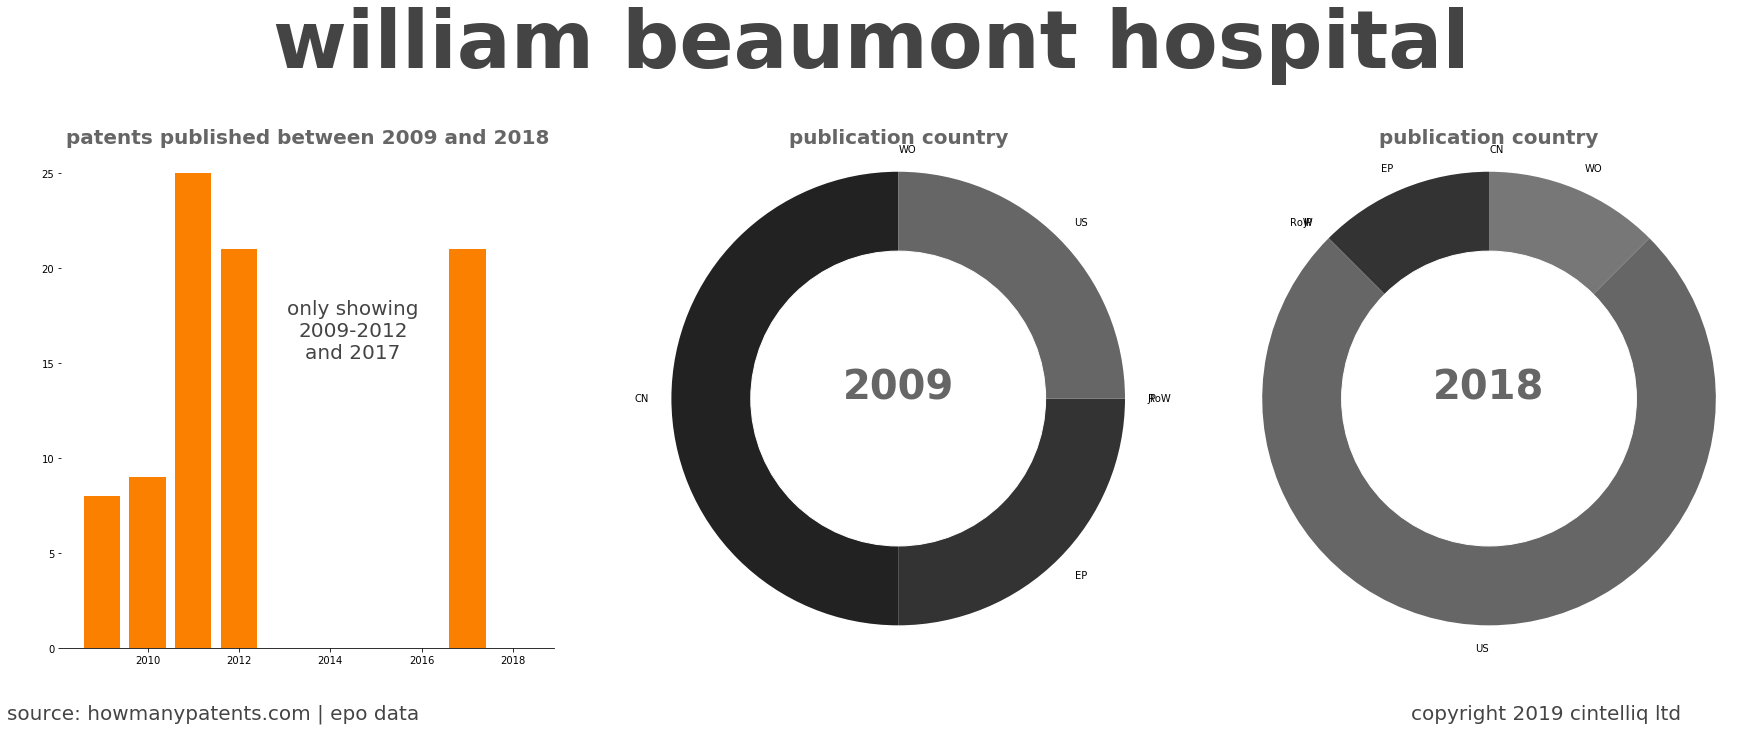 summary of patents for William Beaumont Hospital